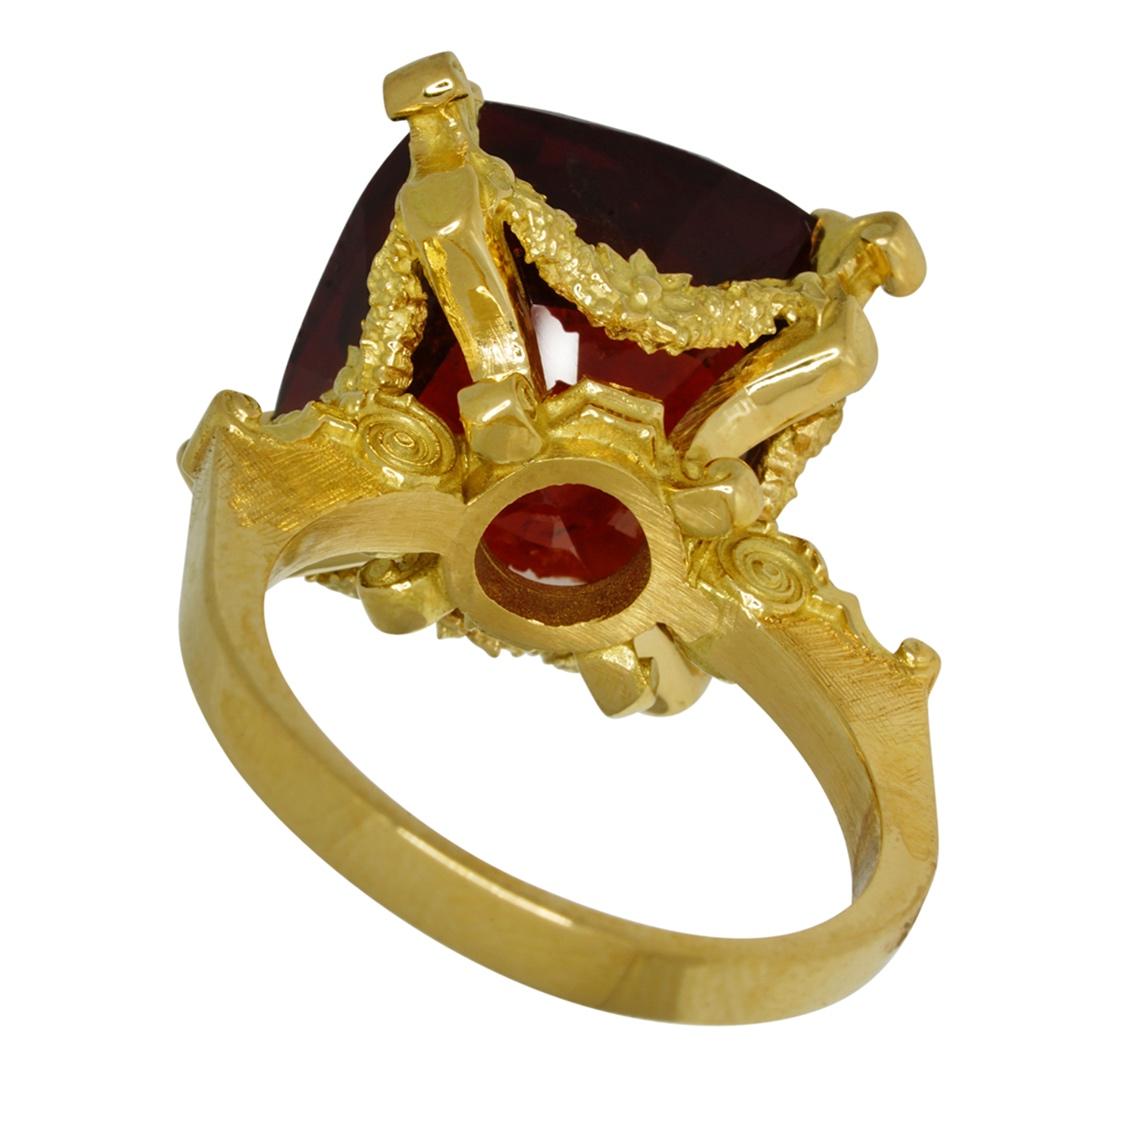 Dionysus and the Nymphs of Nysa Ring in 18kt Gold, Cushion Cut 20.98ct Garnet For Sale 7